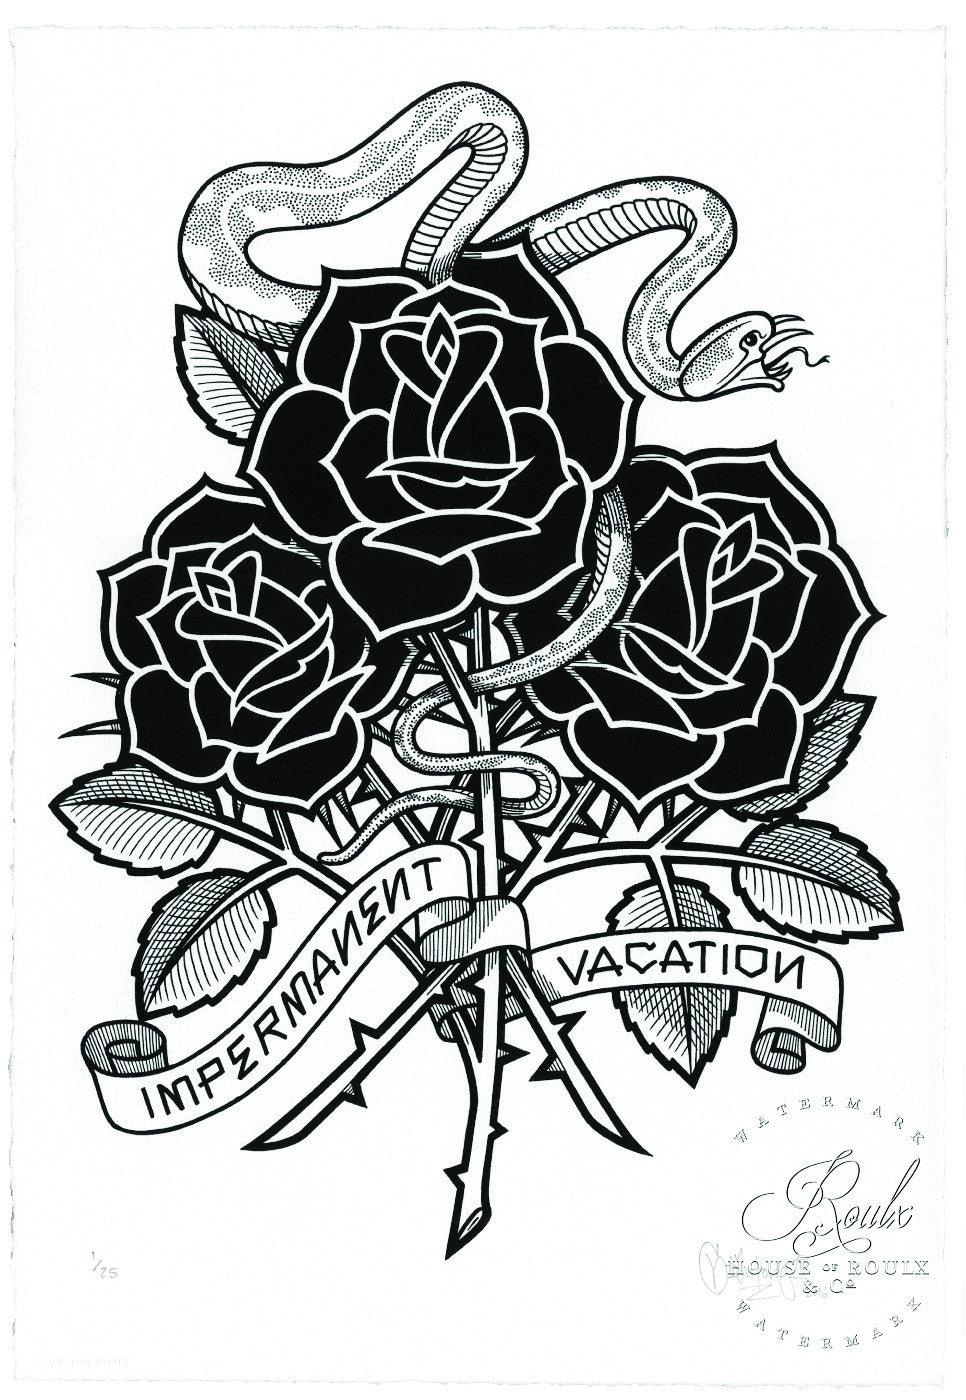 Mike Giant &quot;Black Roses (Impermanent Vacation)&quot; - Limited Edition, Archival Print - 13 x 19